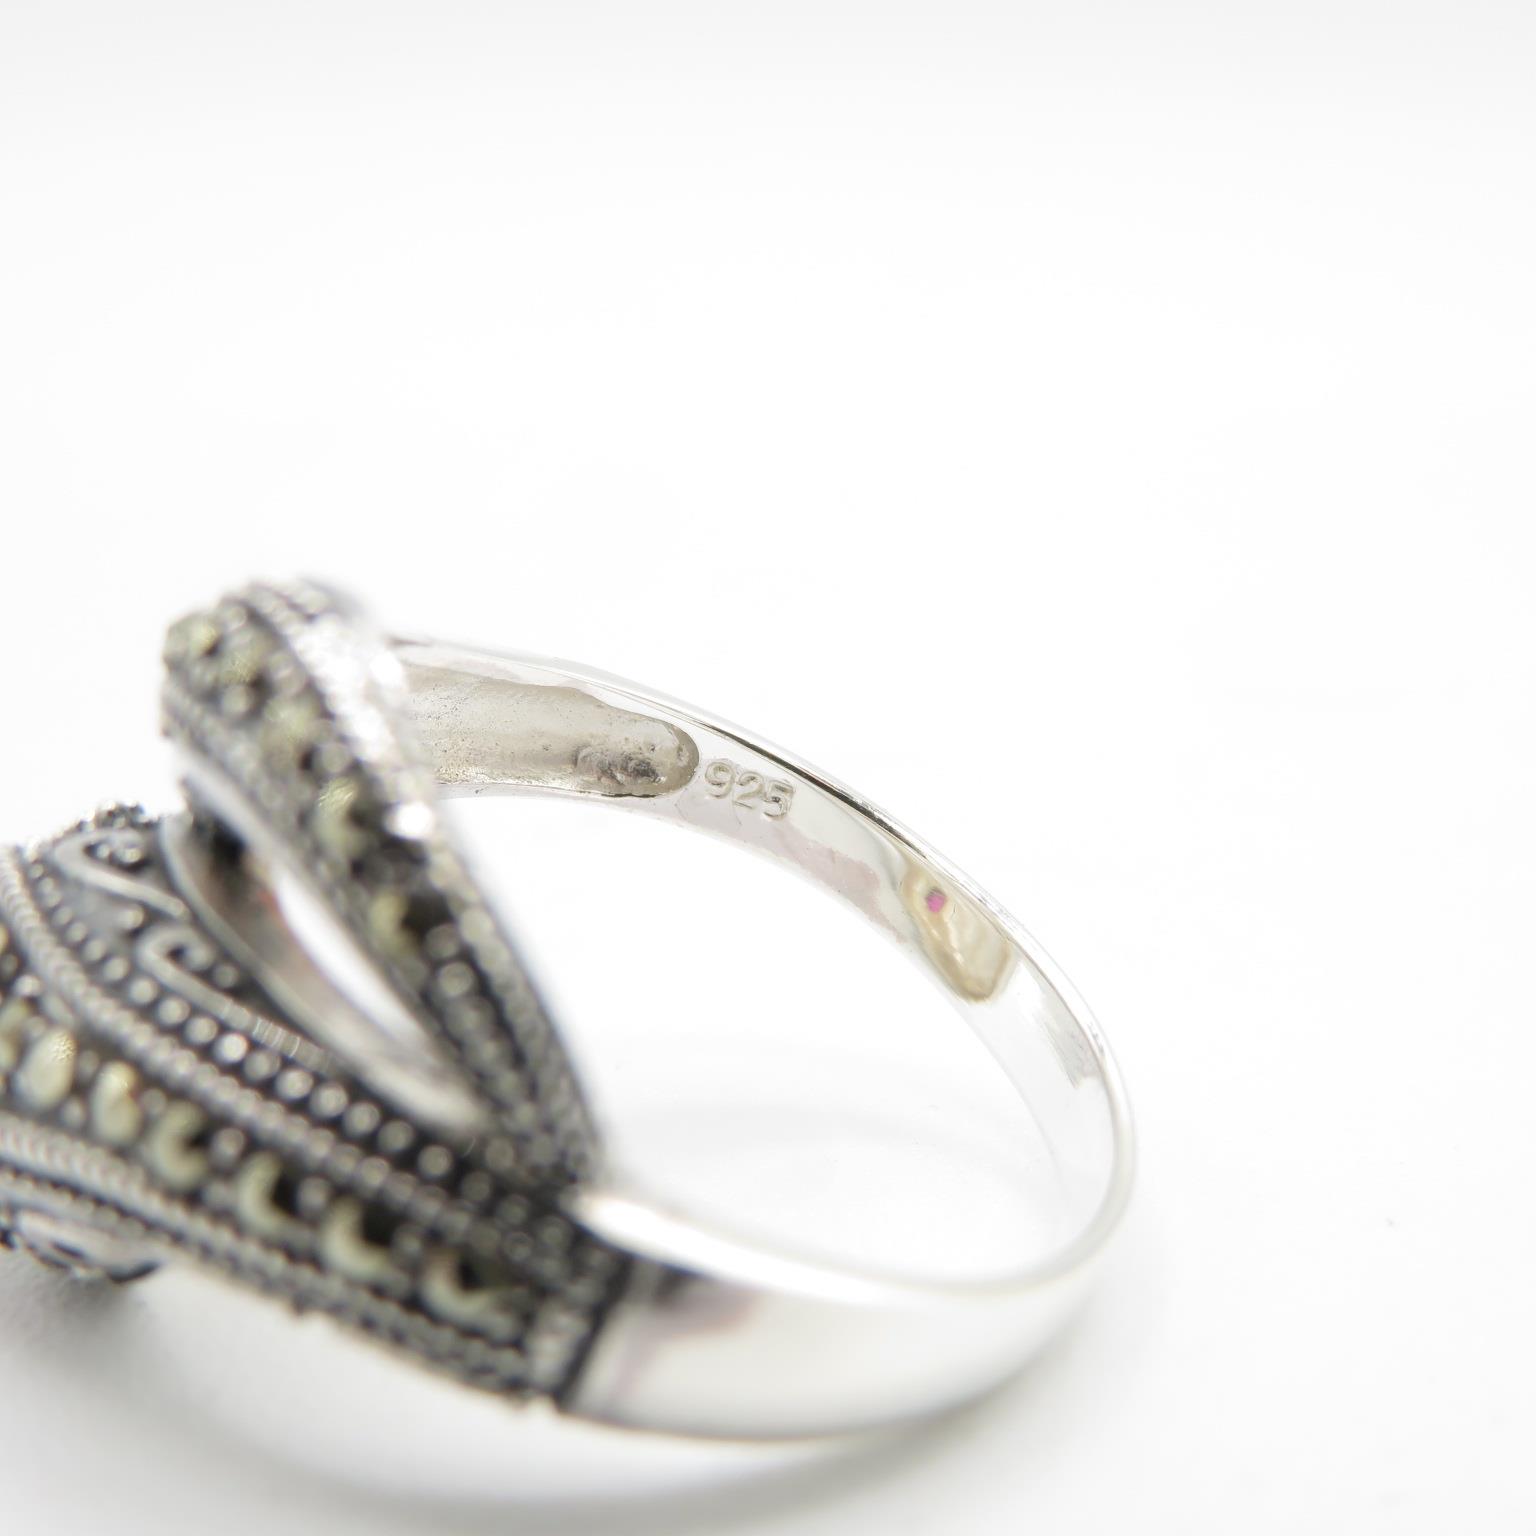 HM 925 Sterling Silver snake ring with red stone eyes (5.6g) In excellent condition - Image 5 of 5